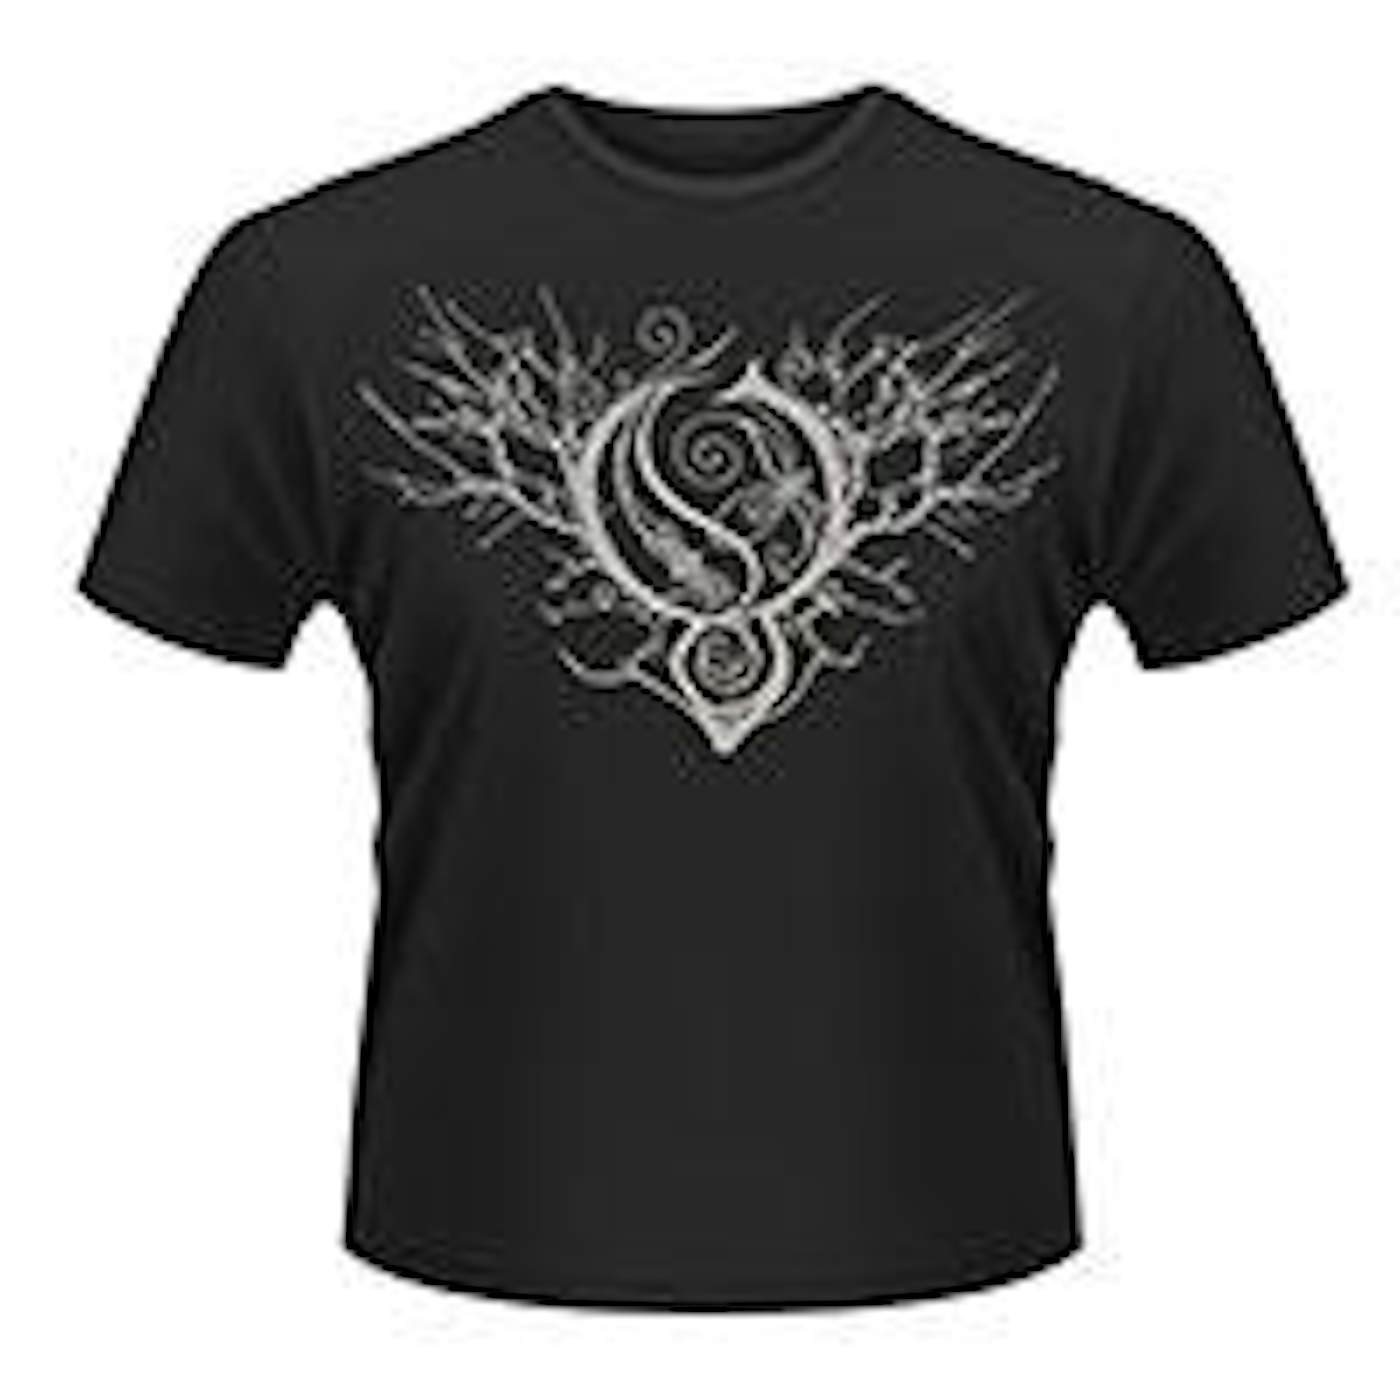 Opeth T Shirt - My Arms Your Hearse